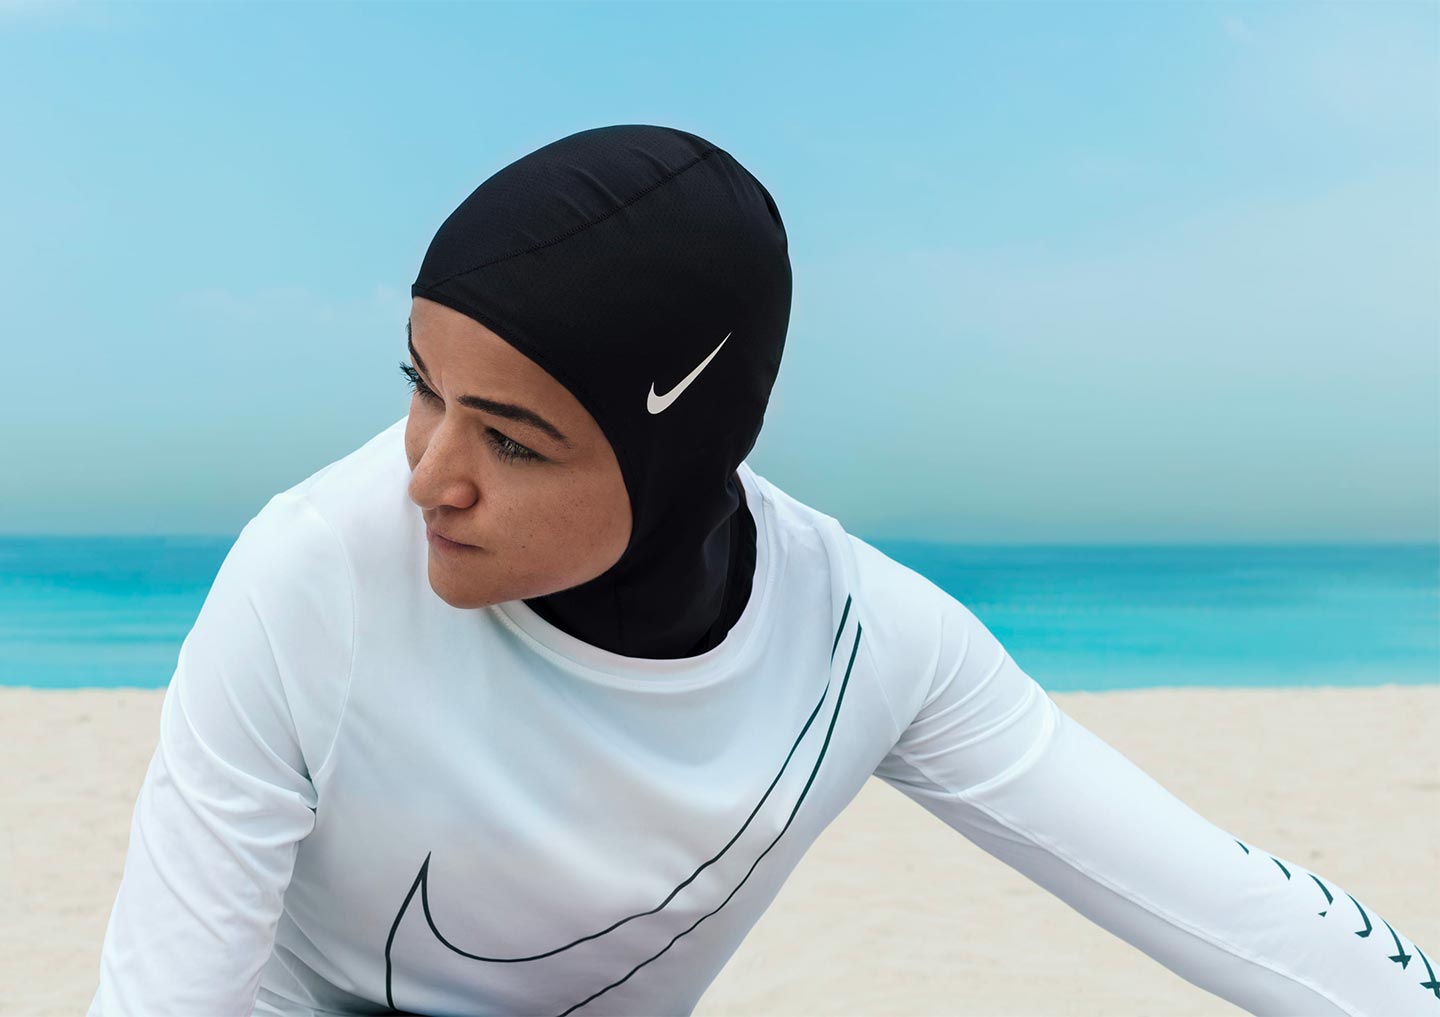 The Nike Pro Women's Hijab was launched in December 2017 and targets Muslim female athletes.